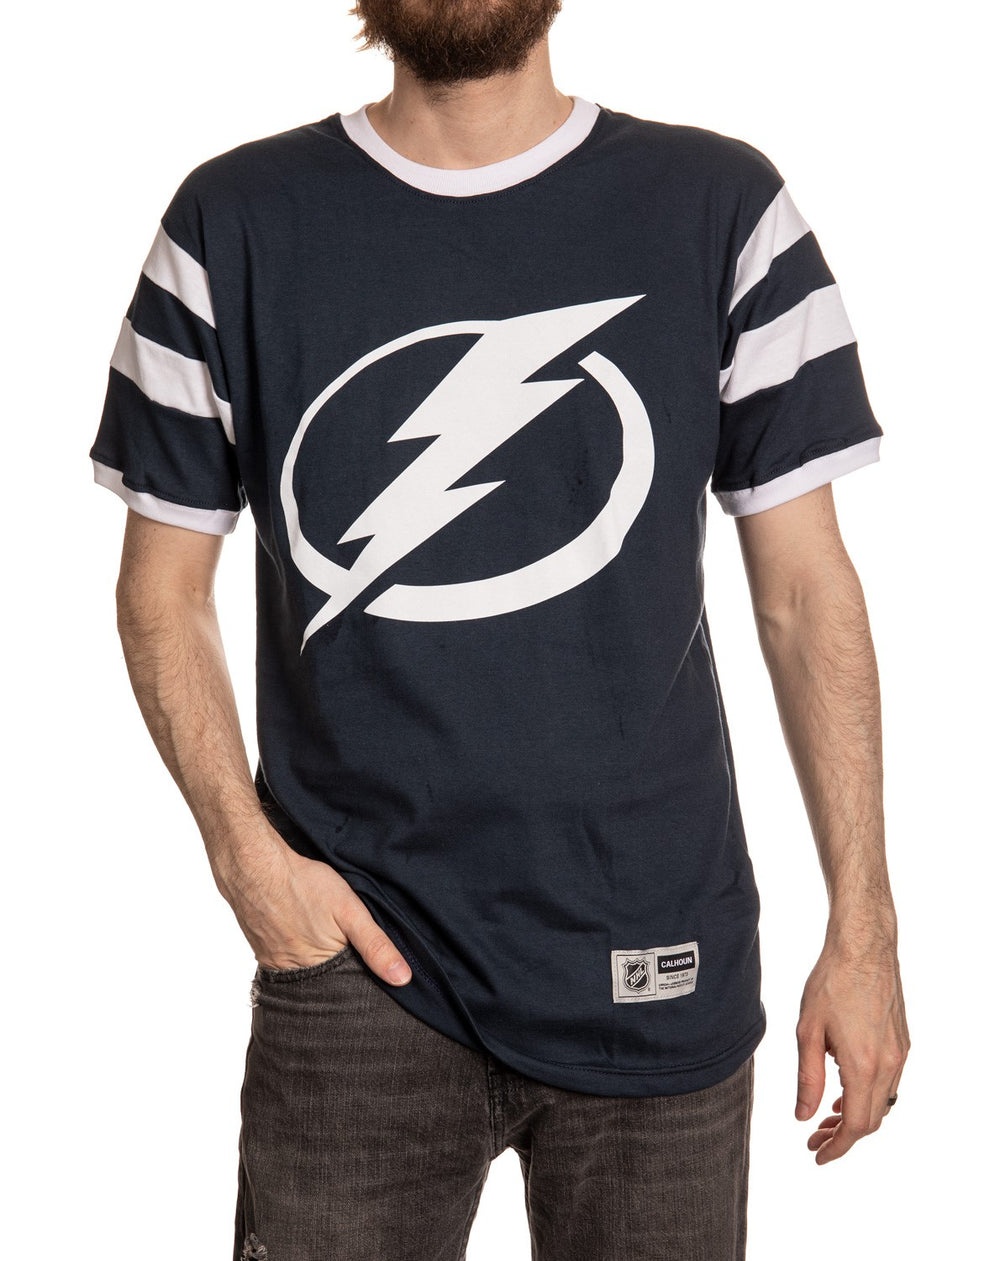 Tampa Bay Lightning Varsity T-Shirt Front View. Blue and White Design